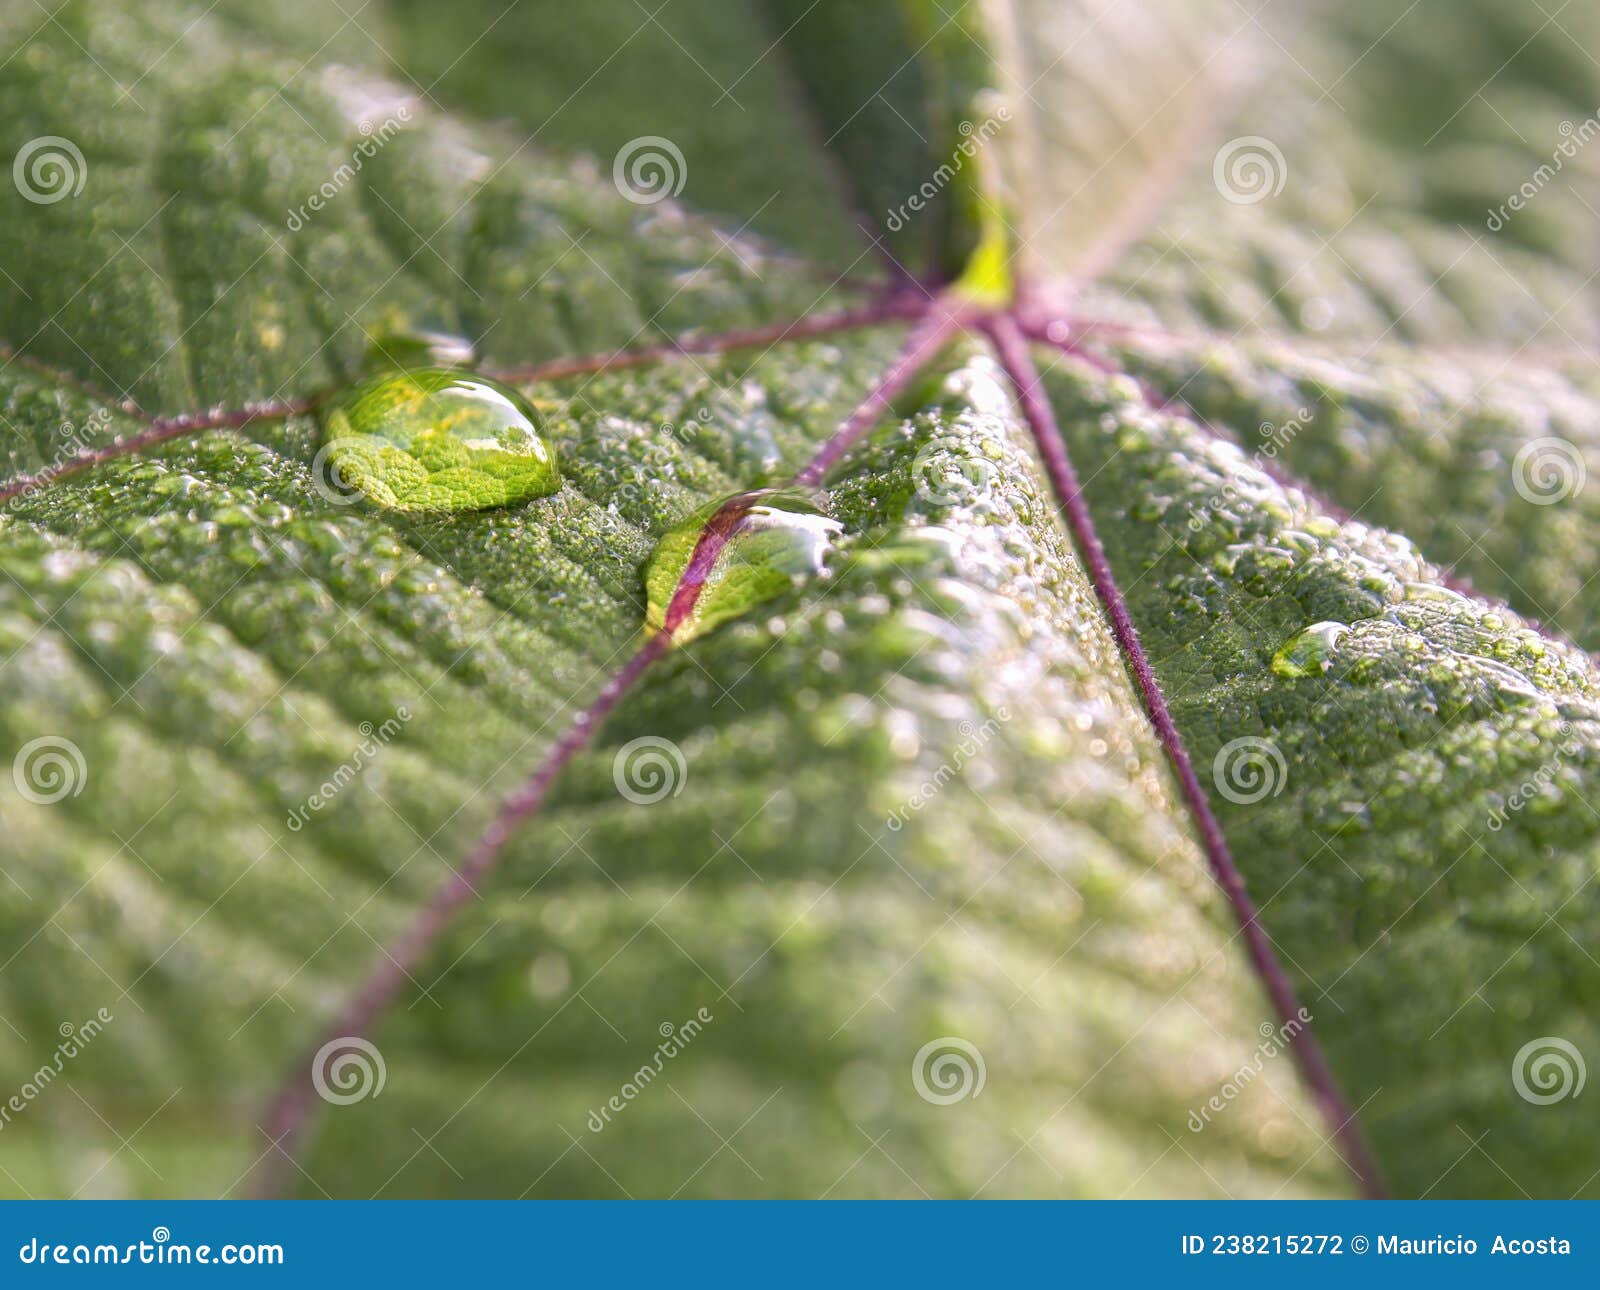 macro photography of a couple of rain drops on a leaf